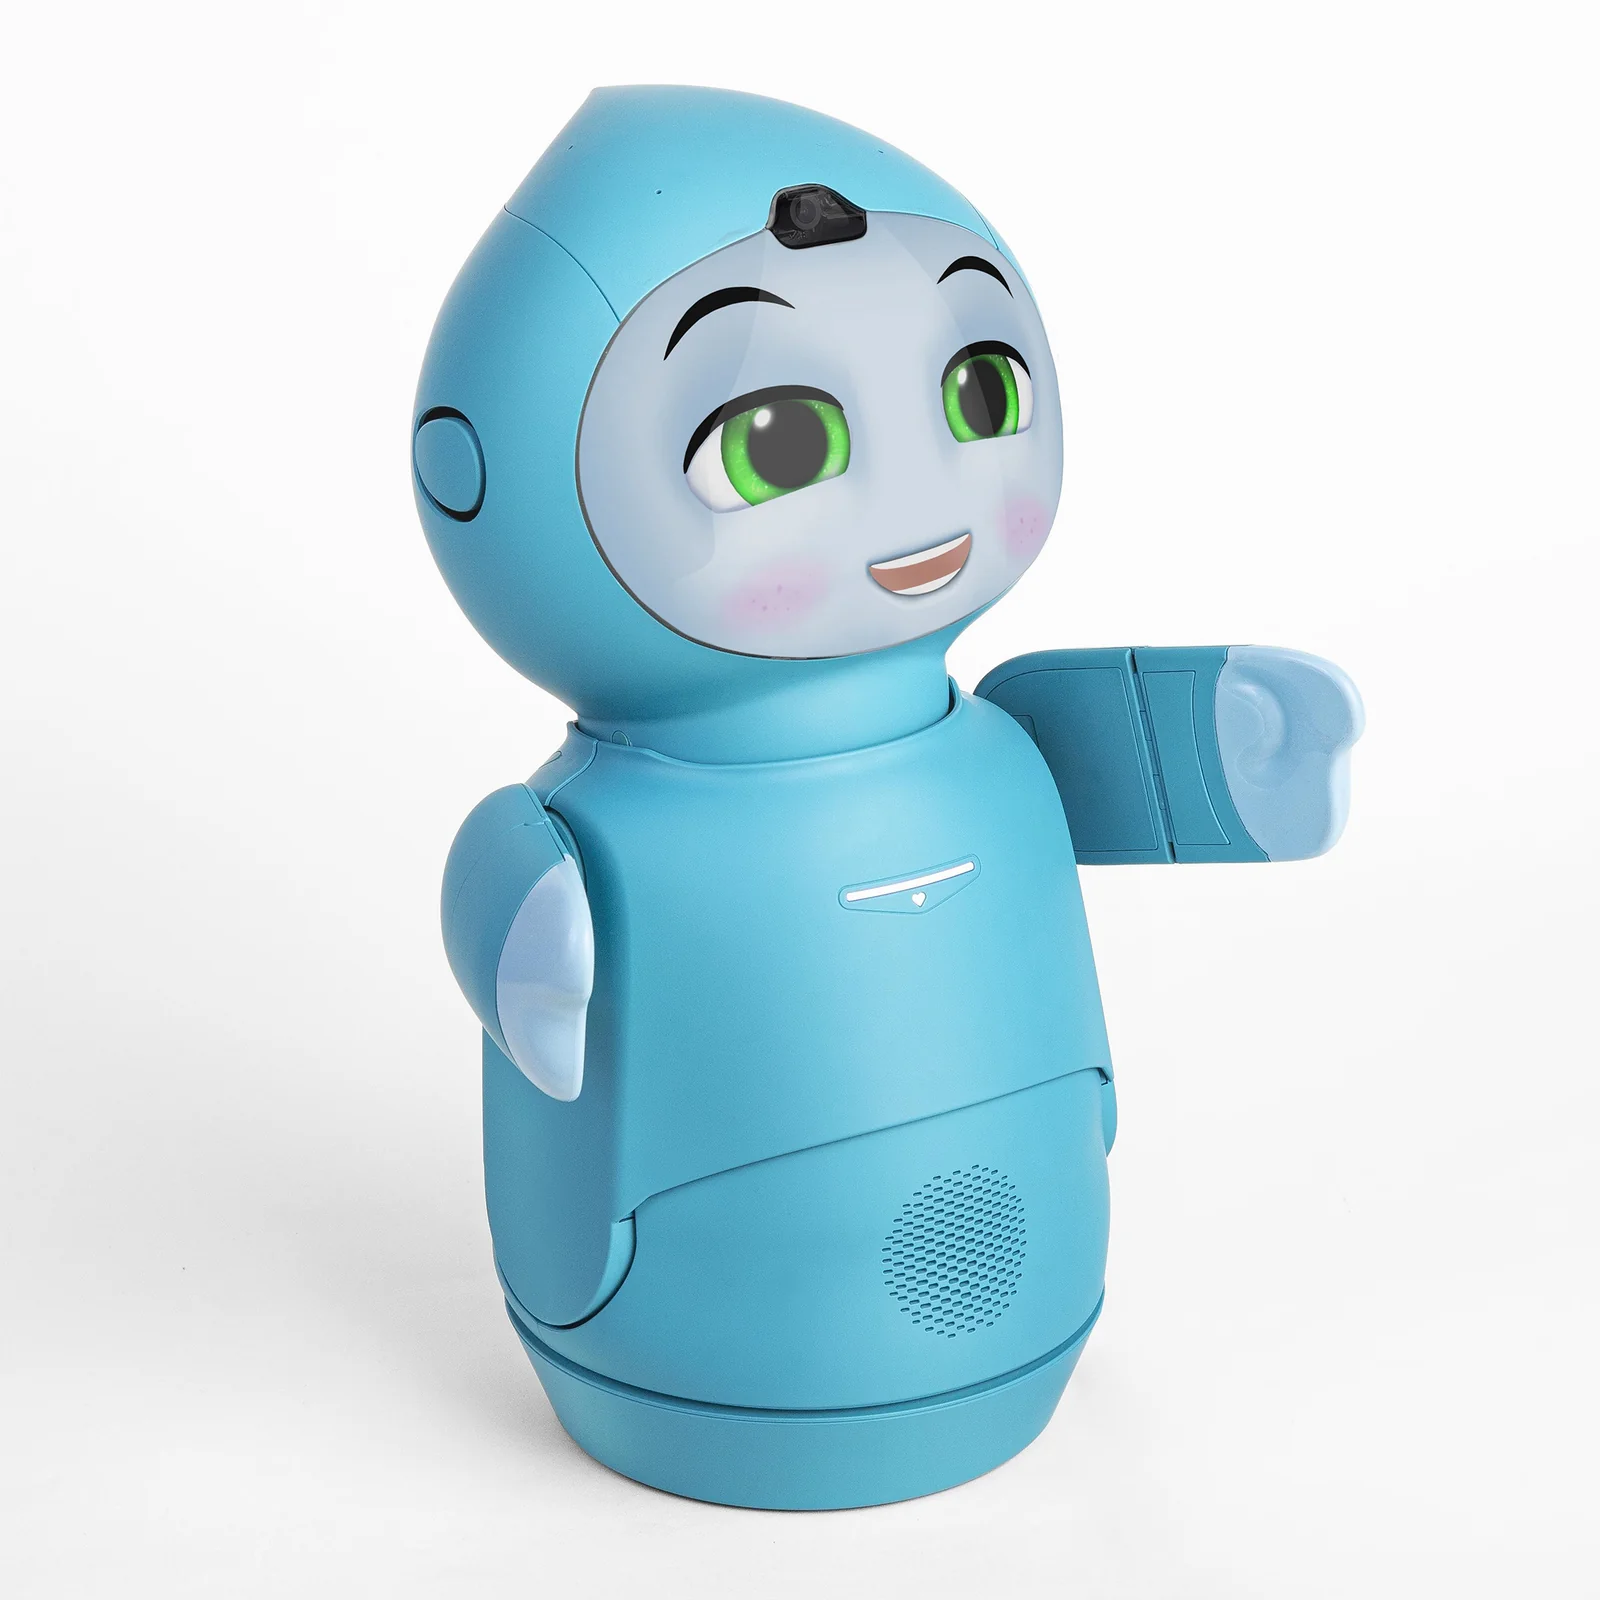 The World's First AI Robot for Kids Aged 5-10 – Moxie Robot